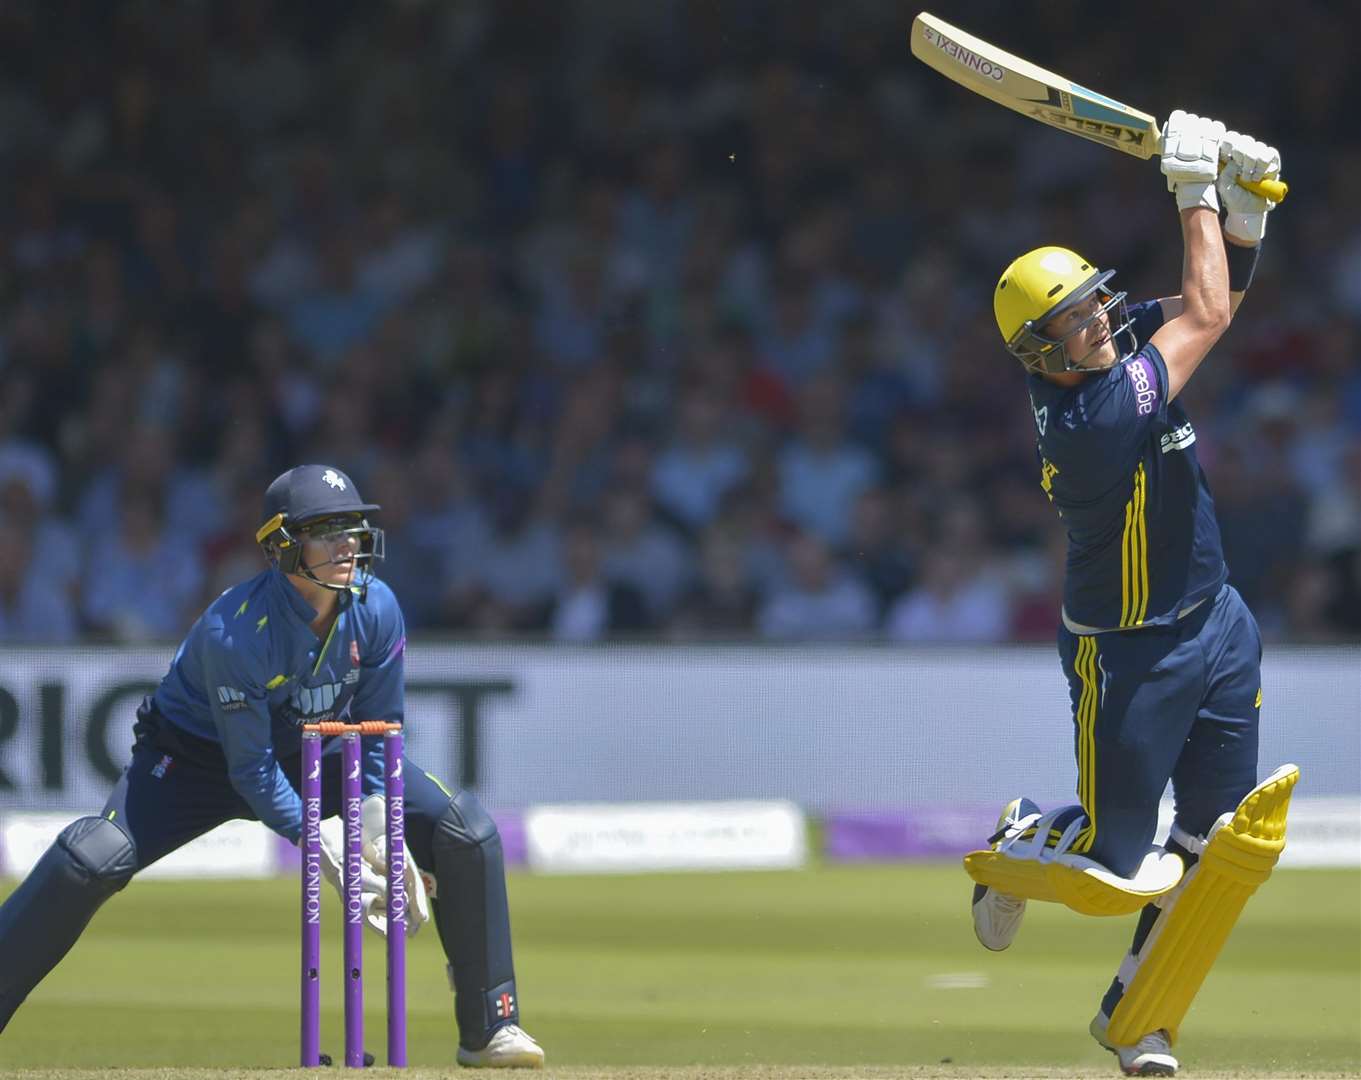 Former Kent skipper Sam Northeast launches the ball to the boundary for Hampshire Picture: Ady Kerry